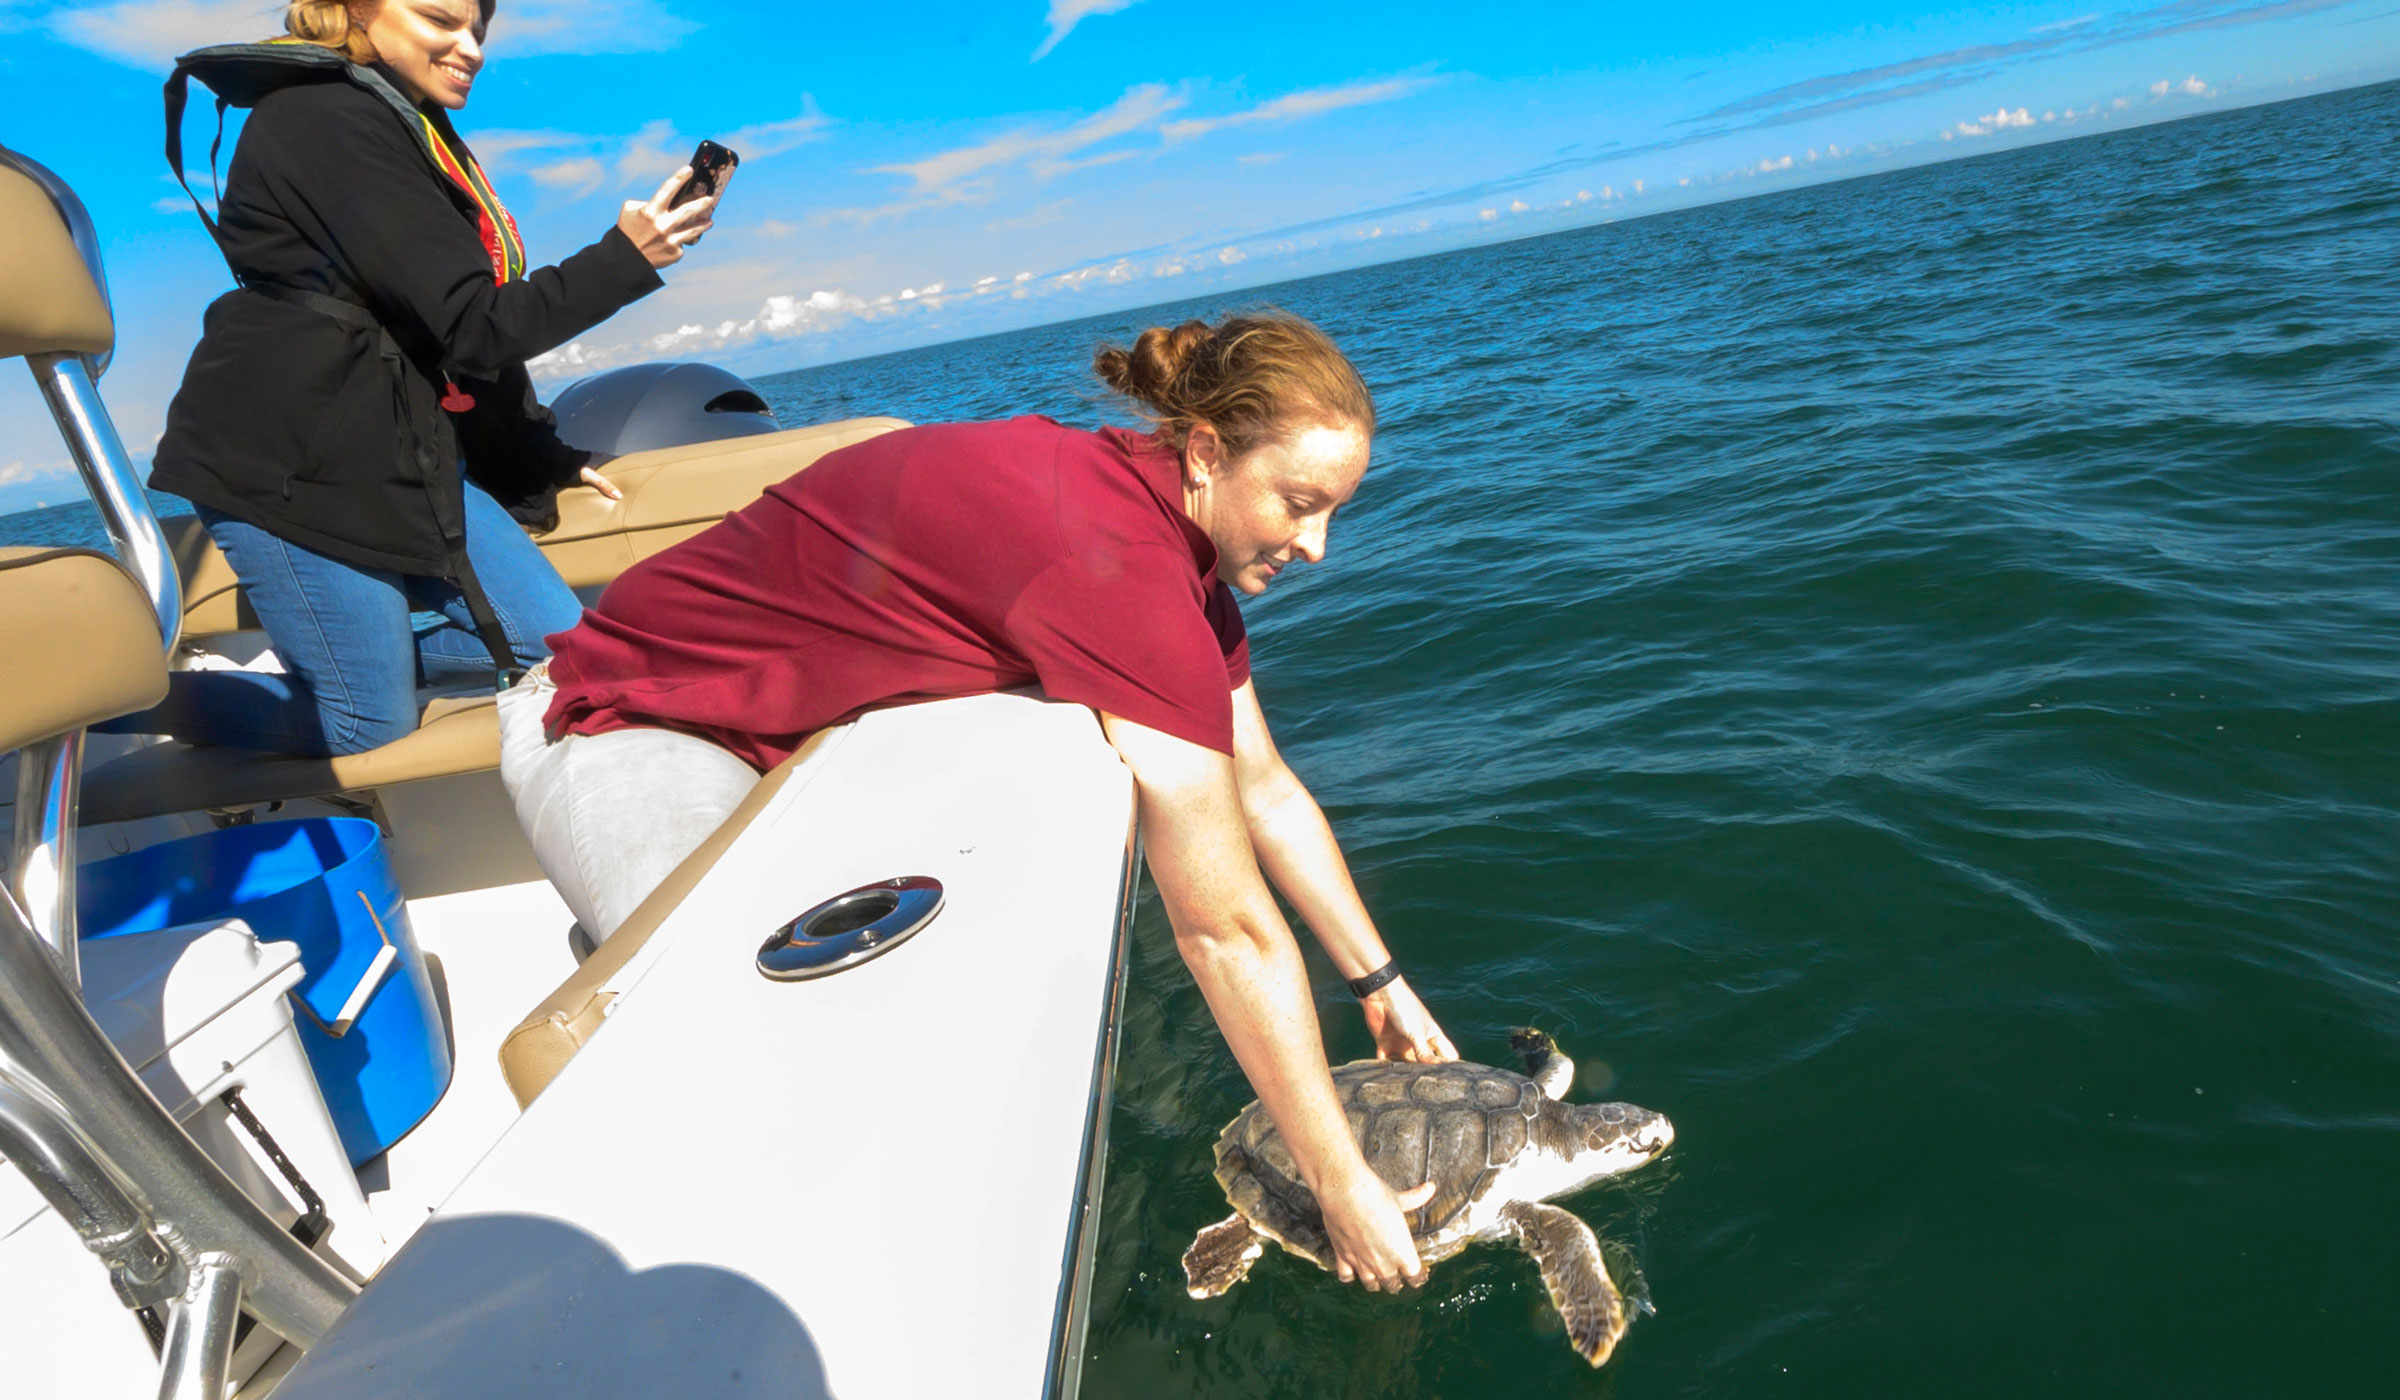 A student dressed in red leans over the side of a white boat, holding a sea turtle just before releasing it into the blue waters of the Gulf of Mexico.